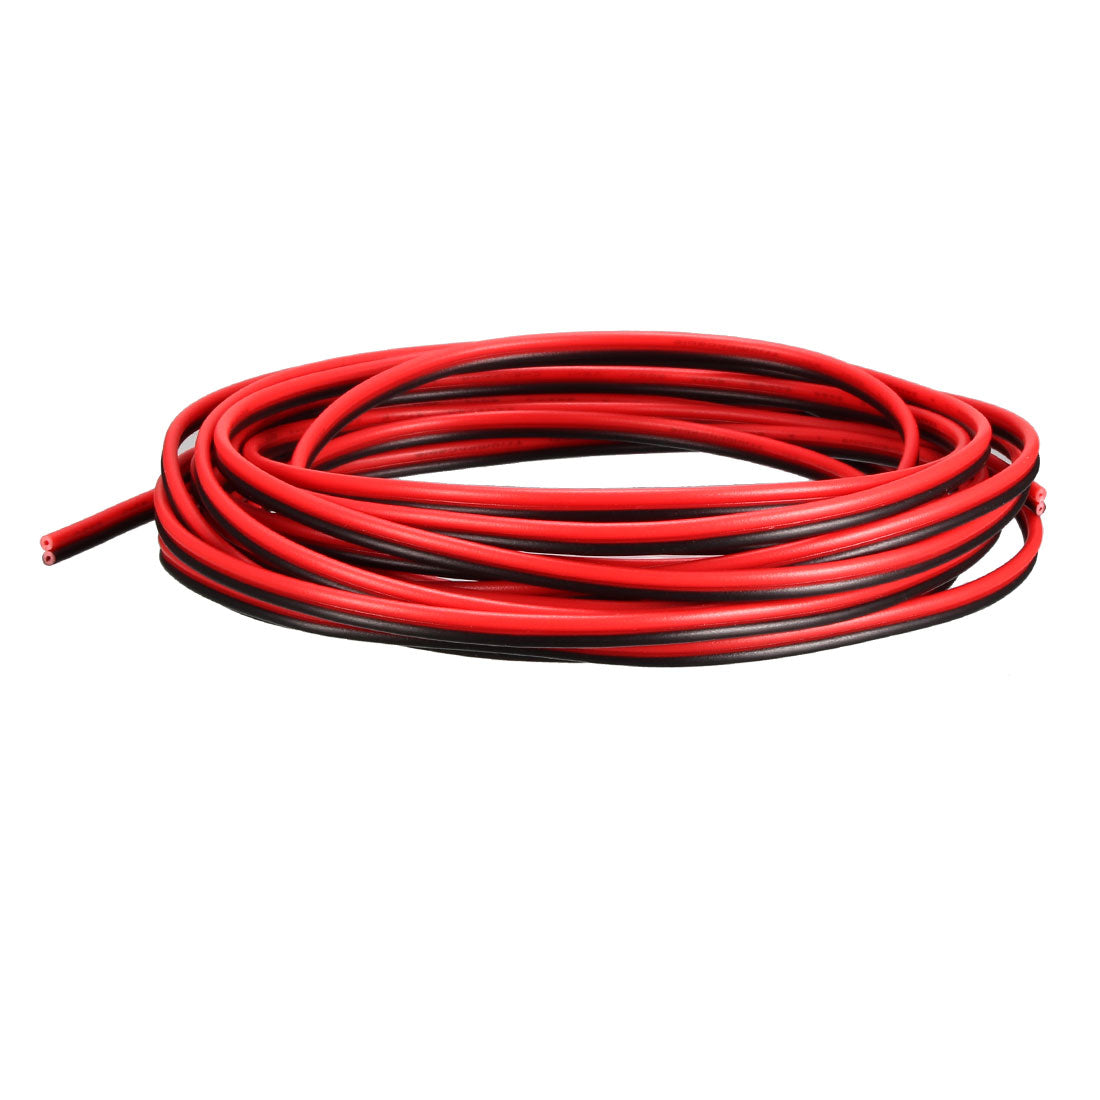 uxcell Uxcell Red Black Wire 2pin Extension Cable Cord 24 AWG Parallel Wire Tin Plated Copper 3 Meters Length for LED Strip Light